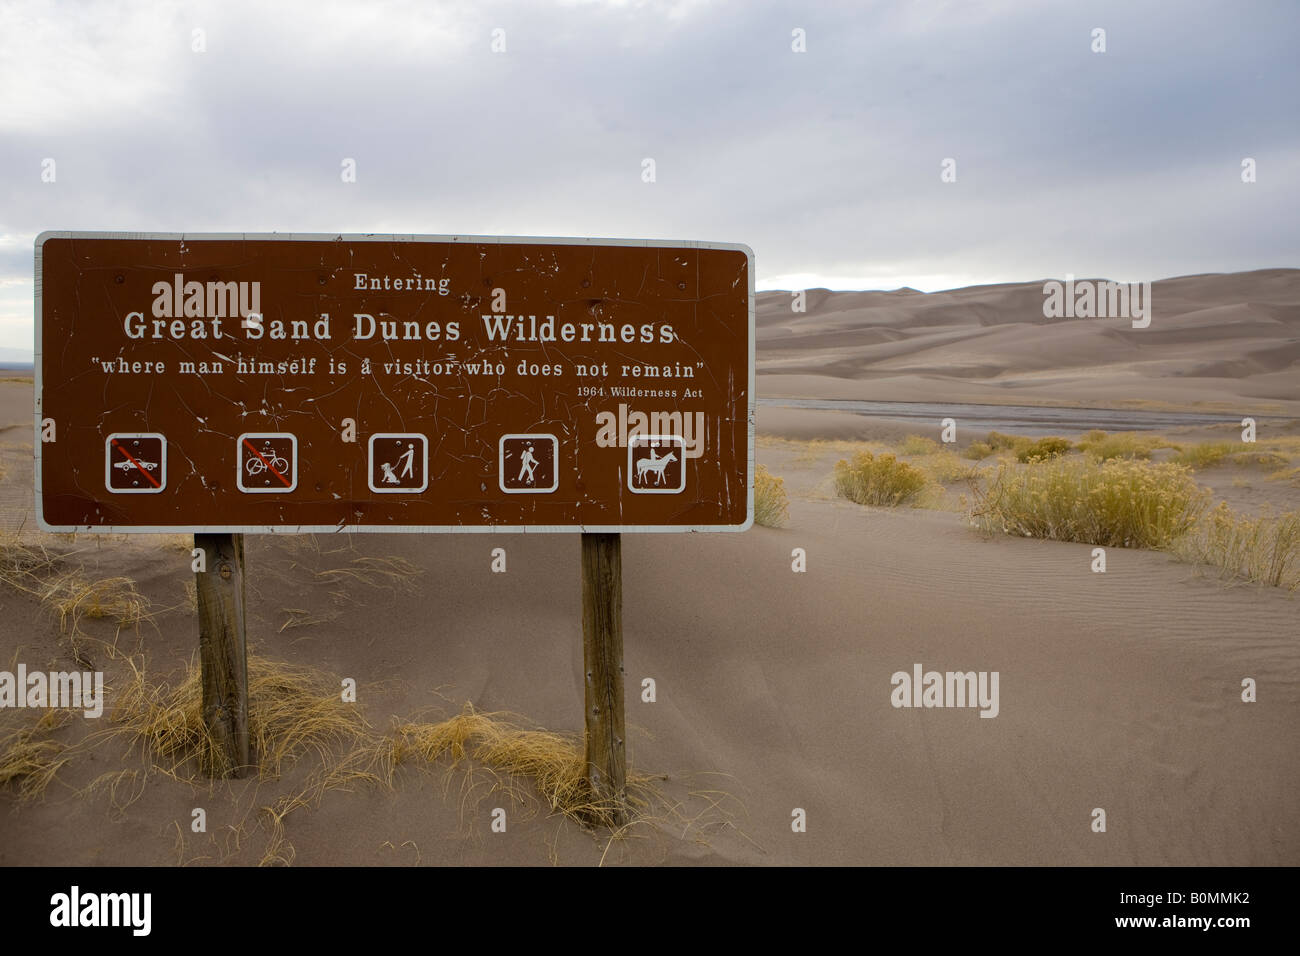 Sign at entrance to dune field which reads Entering Great Sand Dunes Wilderness where man himself is a visitor who does remain Stock Photo